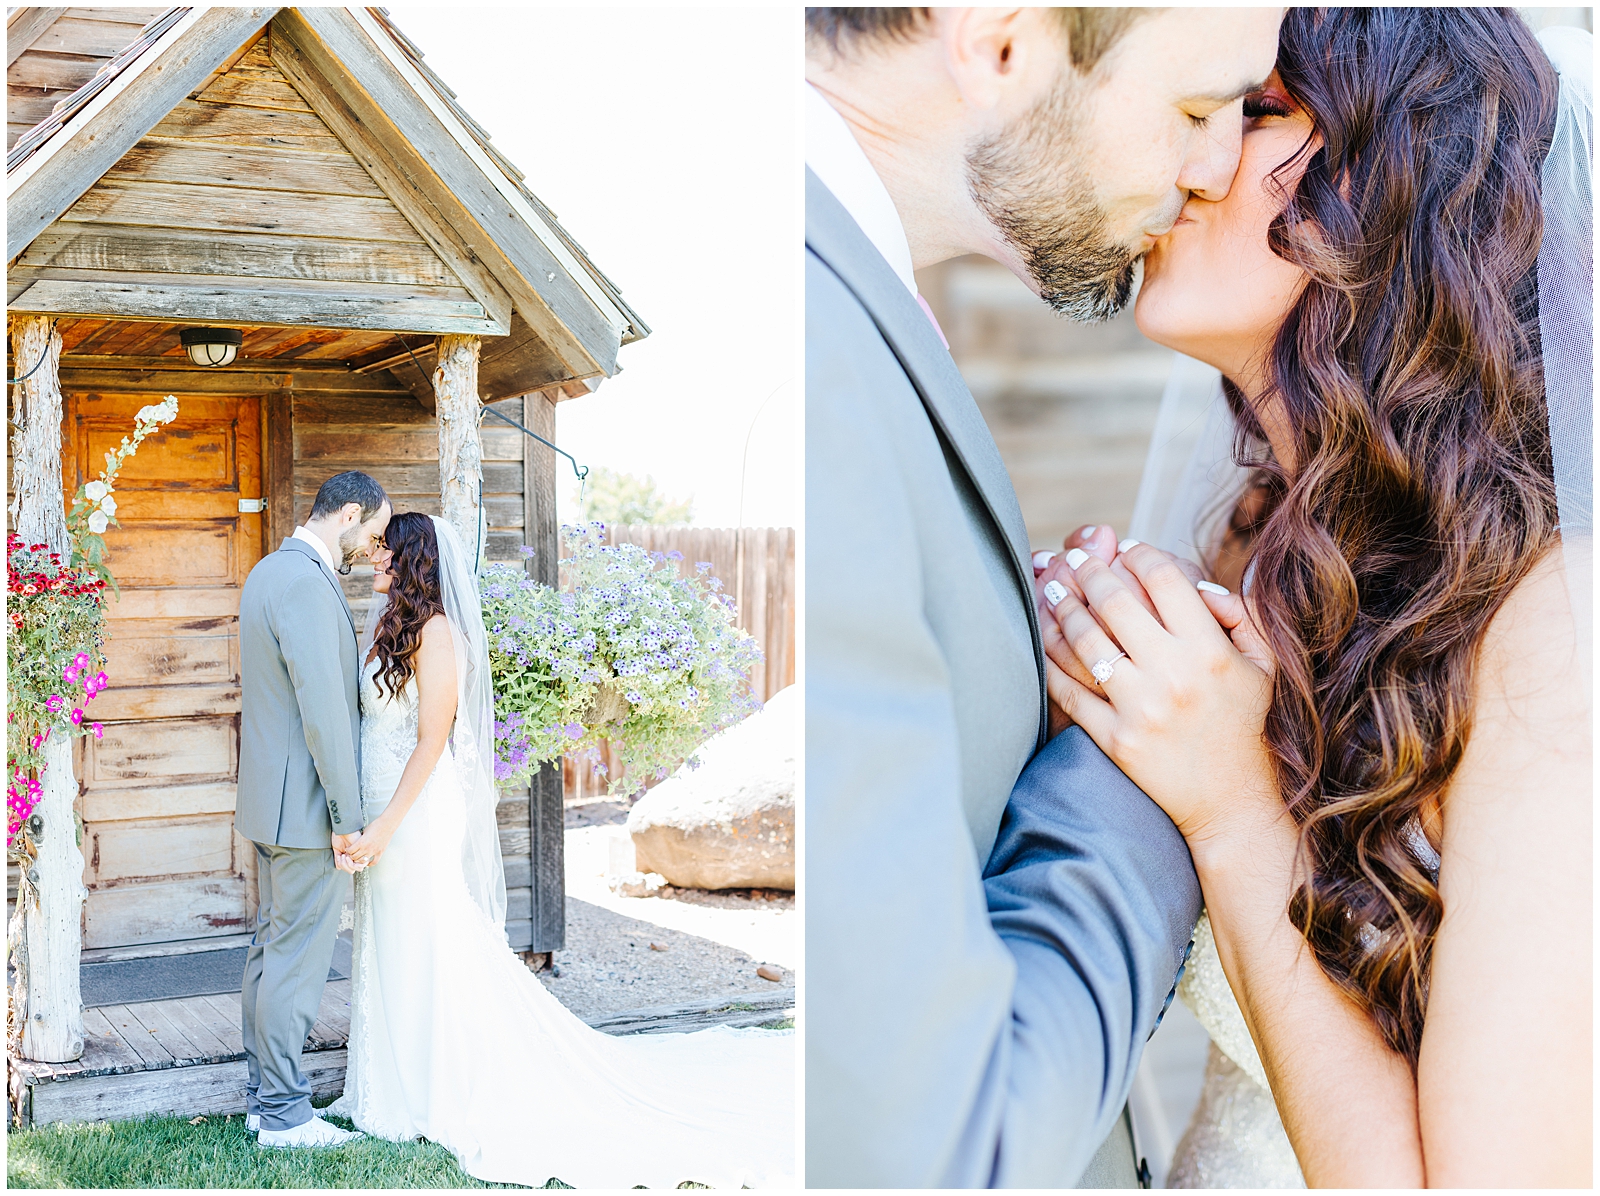 Summer Still Water Hollow Wedding in front of Rustic barns buildings